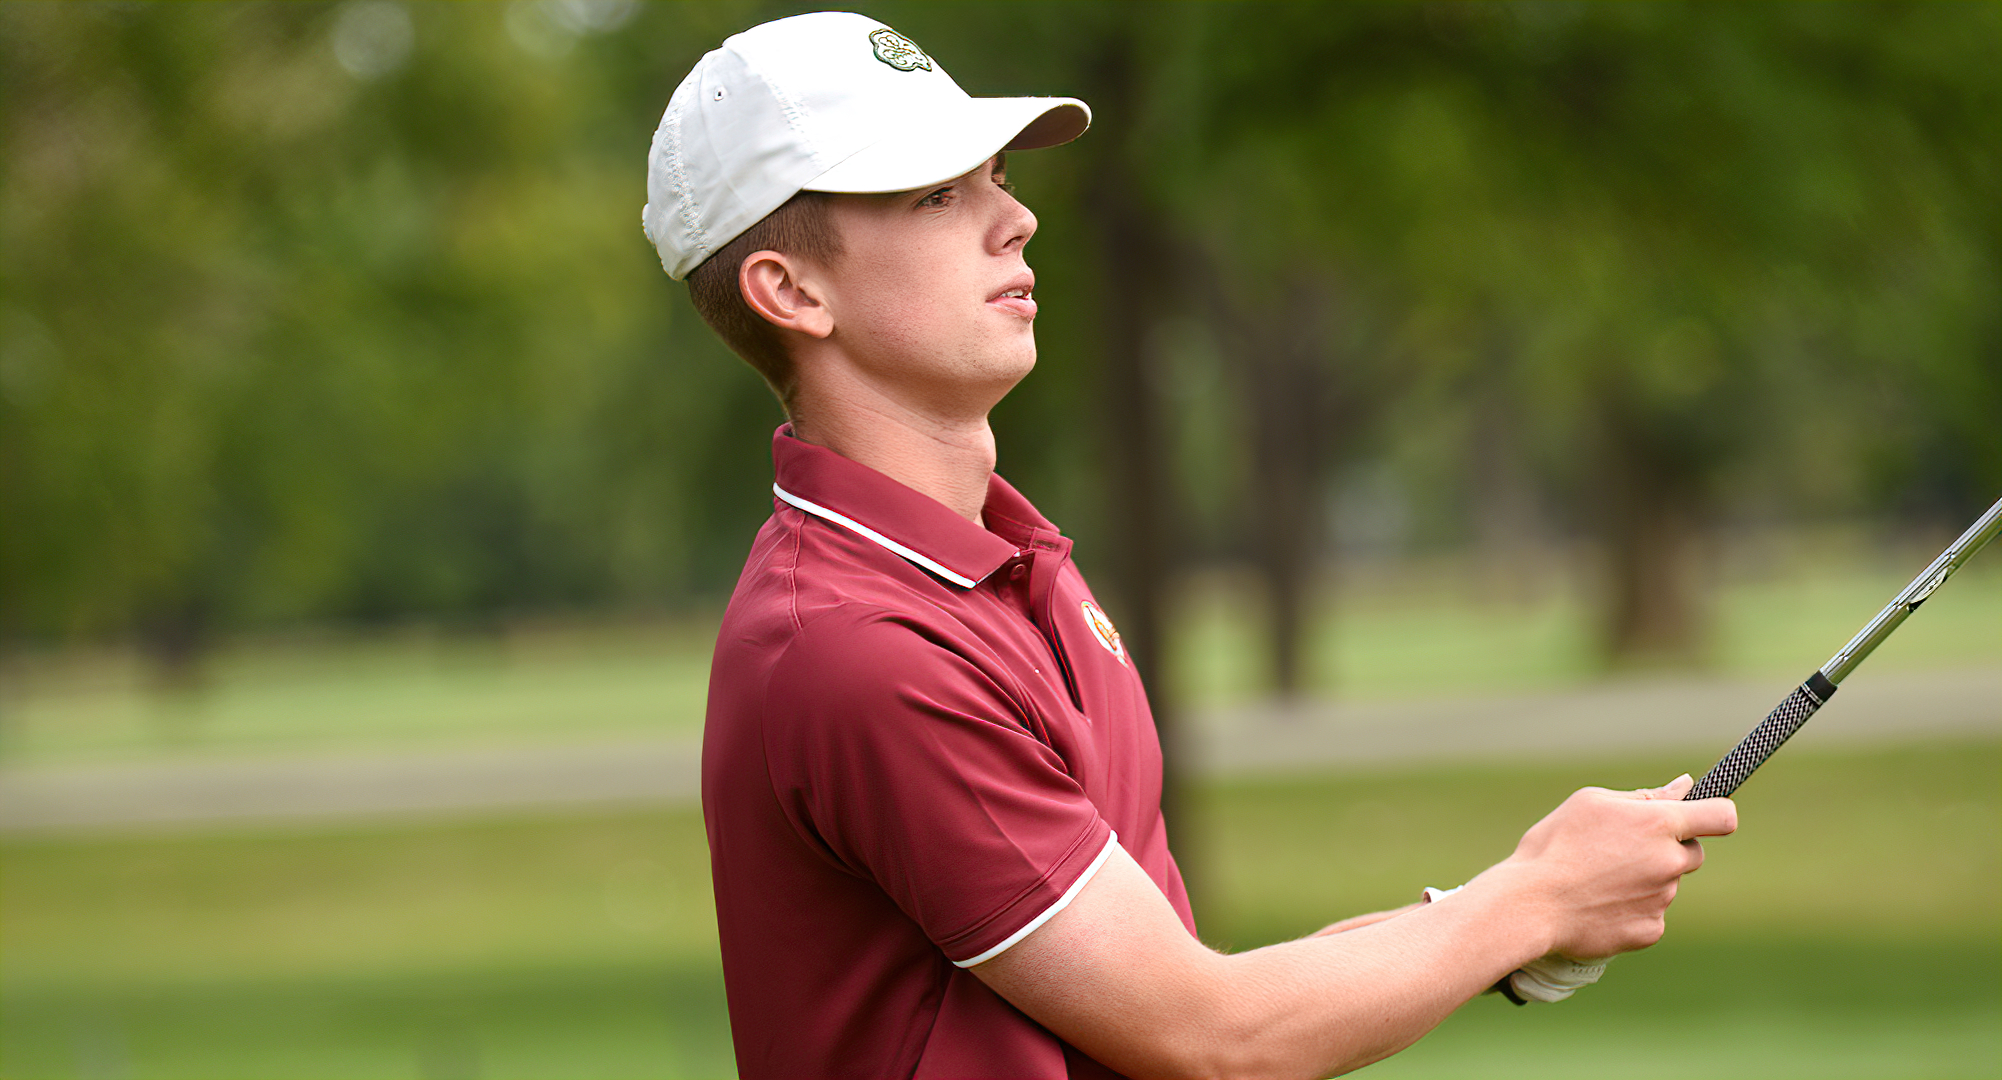 Sam Henke shot a team-low 77 at the SJU Winter Classic which included four birdies and an even-par 36 on the Back 9.